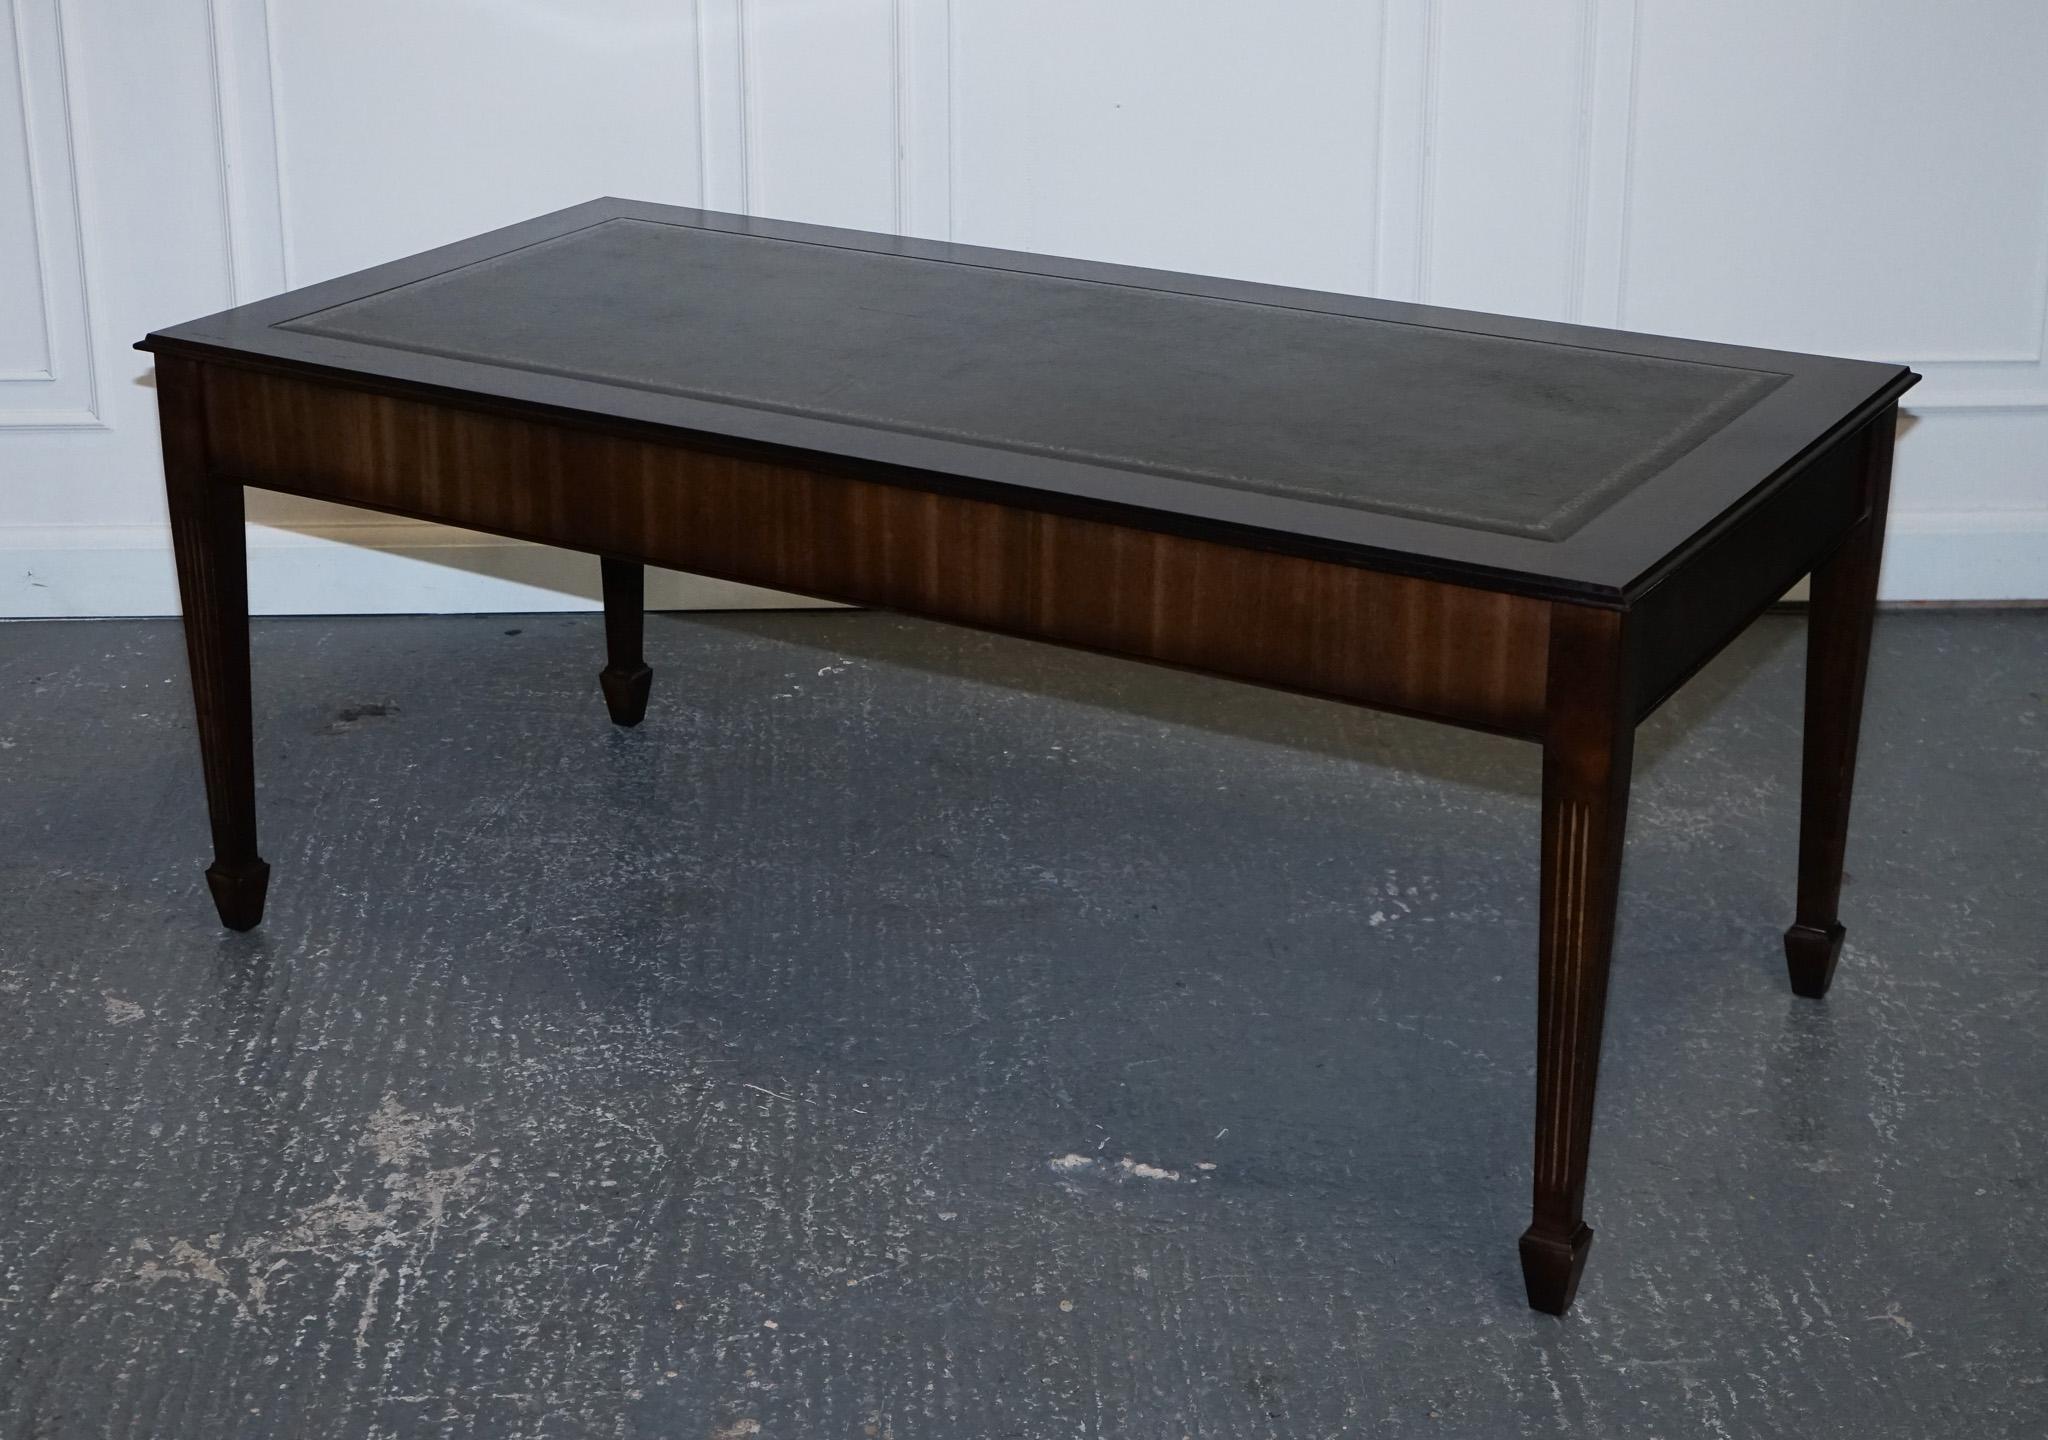 
We are delighted to offer for sale this Large Writing Table Desk With Dark Green Embossed Leather Top.

A well-made desk, large enough for two people, or for doing big drawings, projects etc.

Legs can be removed for easier manoeuvring in your